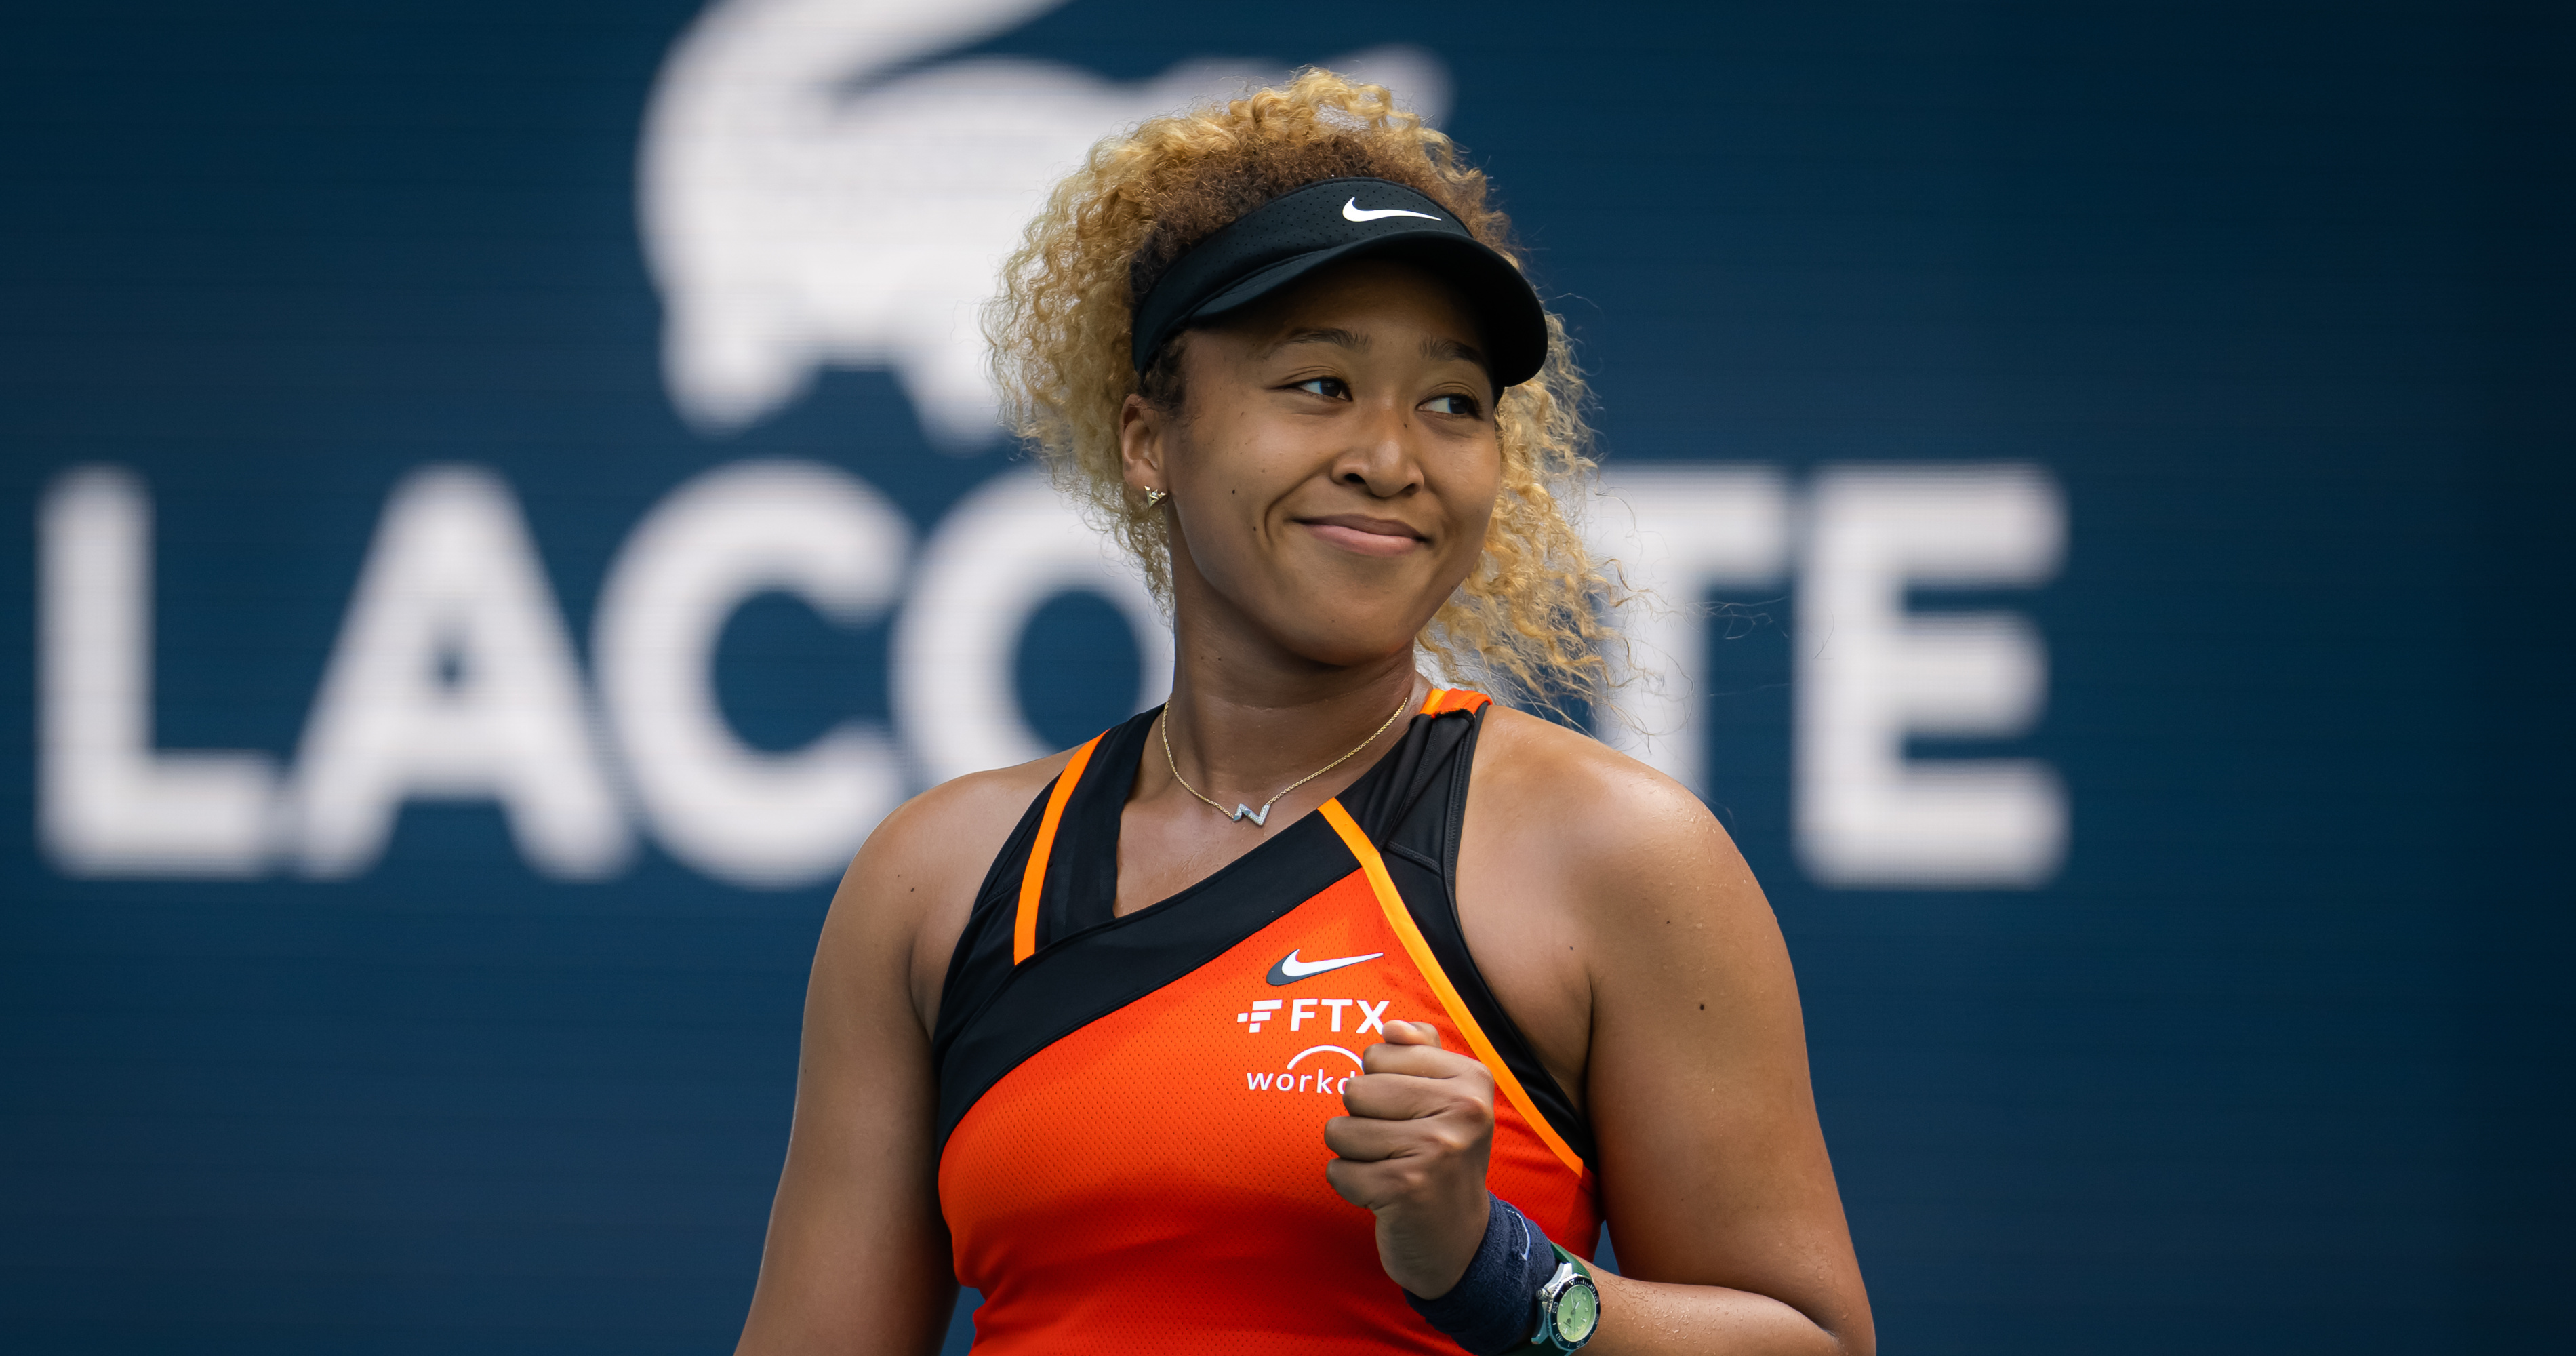 Miami Open Masters 2022 Results Naomi Osakas Win Highlights Thursdays Results News, Scores, Highlights, Stats, and Rumors Bleacher Report